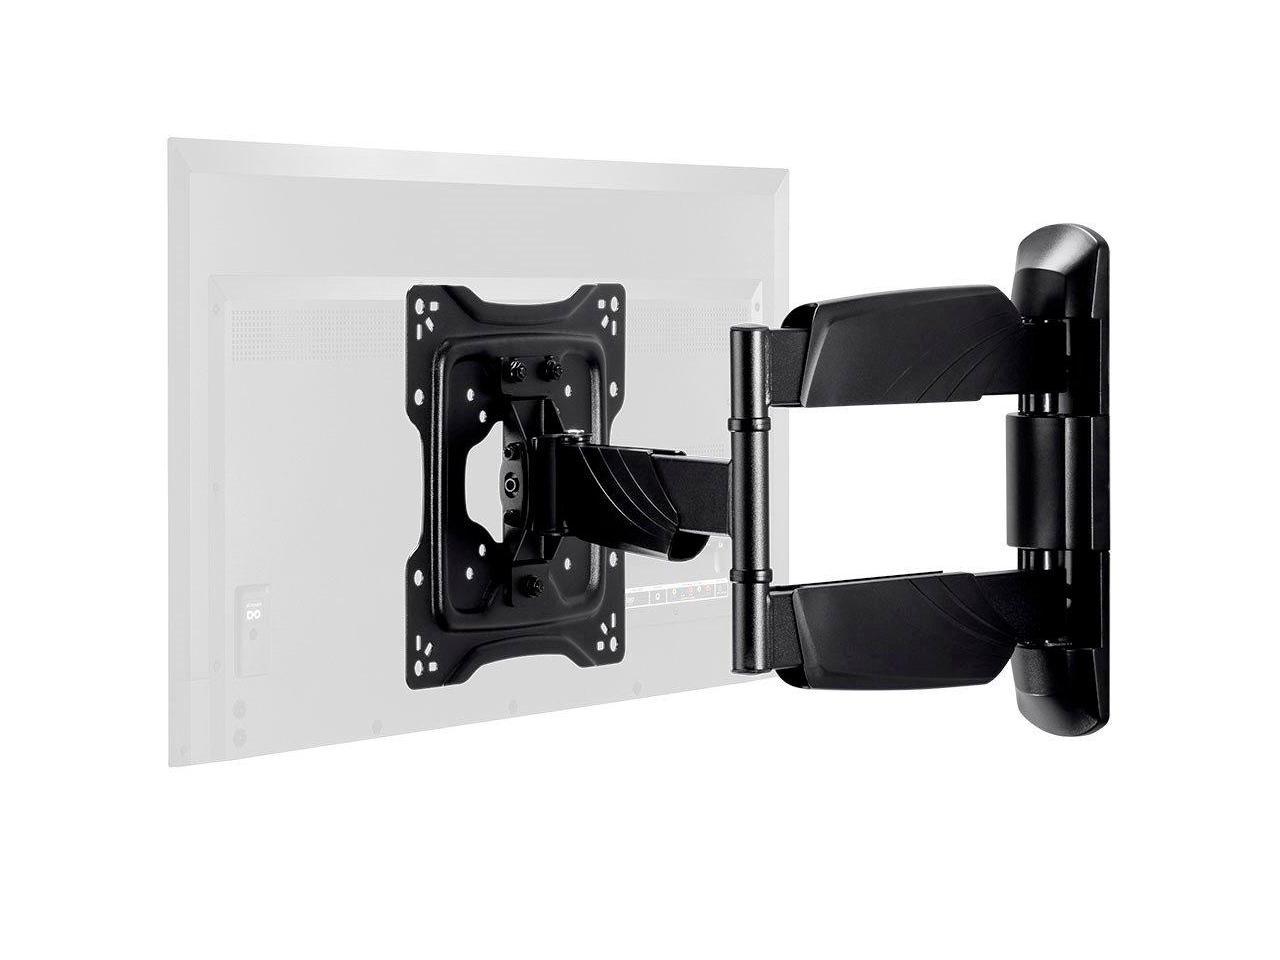 Monoprice Full-Motion Articulating TV Wall Mount Bracket - For LED TVs 24in to 55in, Max Weight 77 Lbs., VESA Patterns Up to 400x400, Rotating, Low Profile, UL Certified - Commercial Series - image 1 of 20